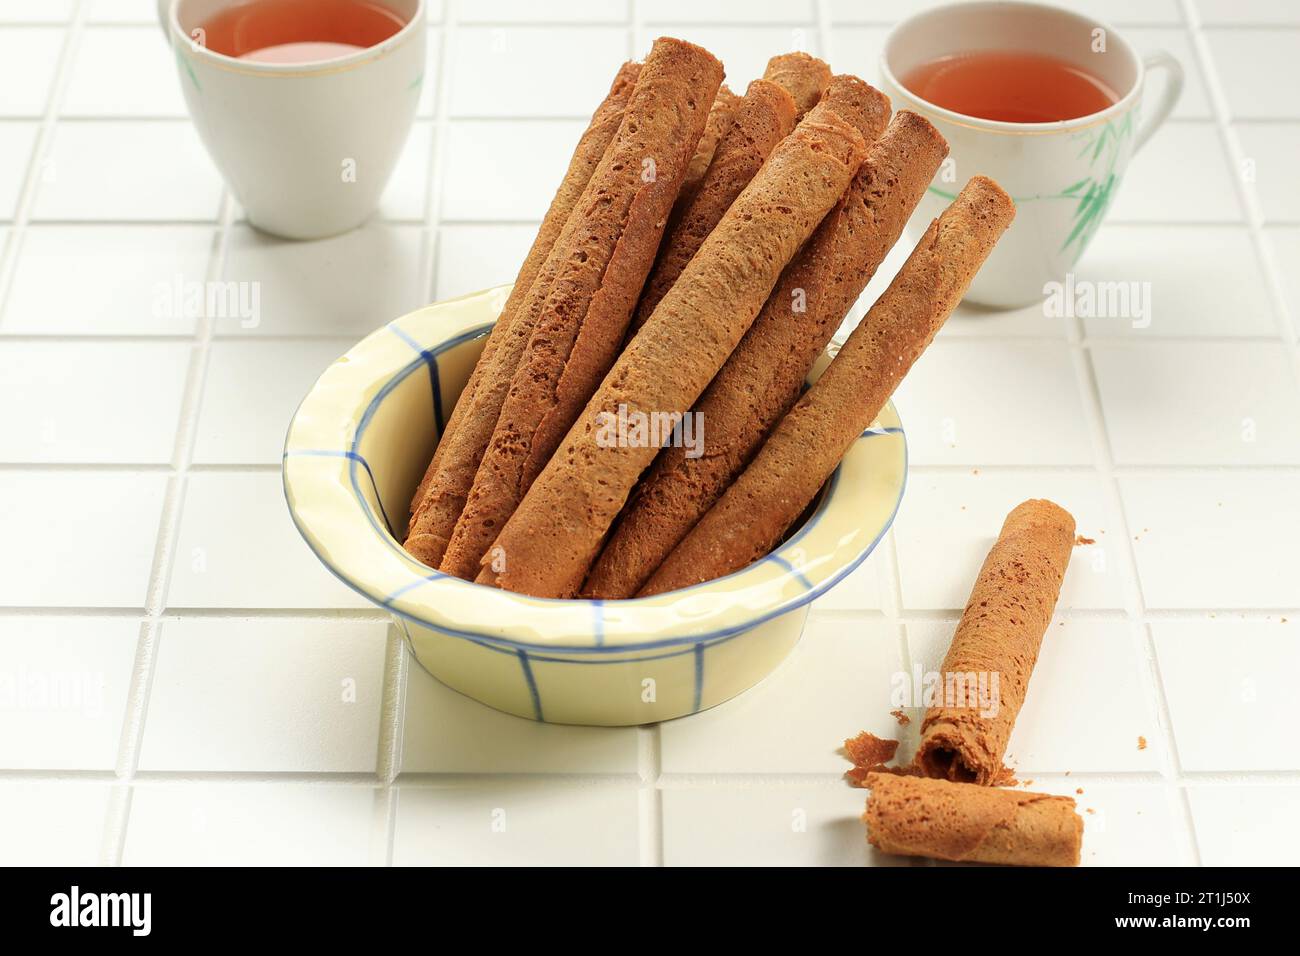 Kue Semprong or Waffle Egg Rolls, Indoneisan Traditional Cake Snack made from Flour and Sugar and Shaped like a Pipe Stock Photo